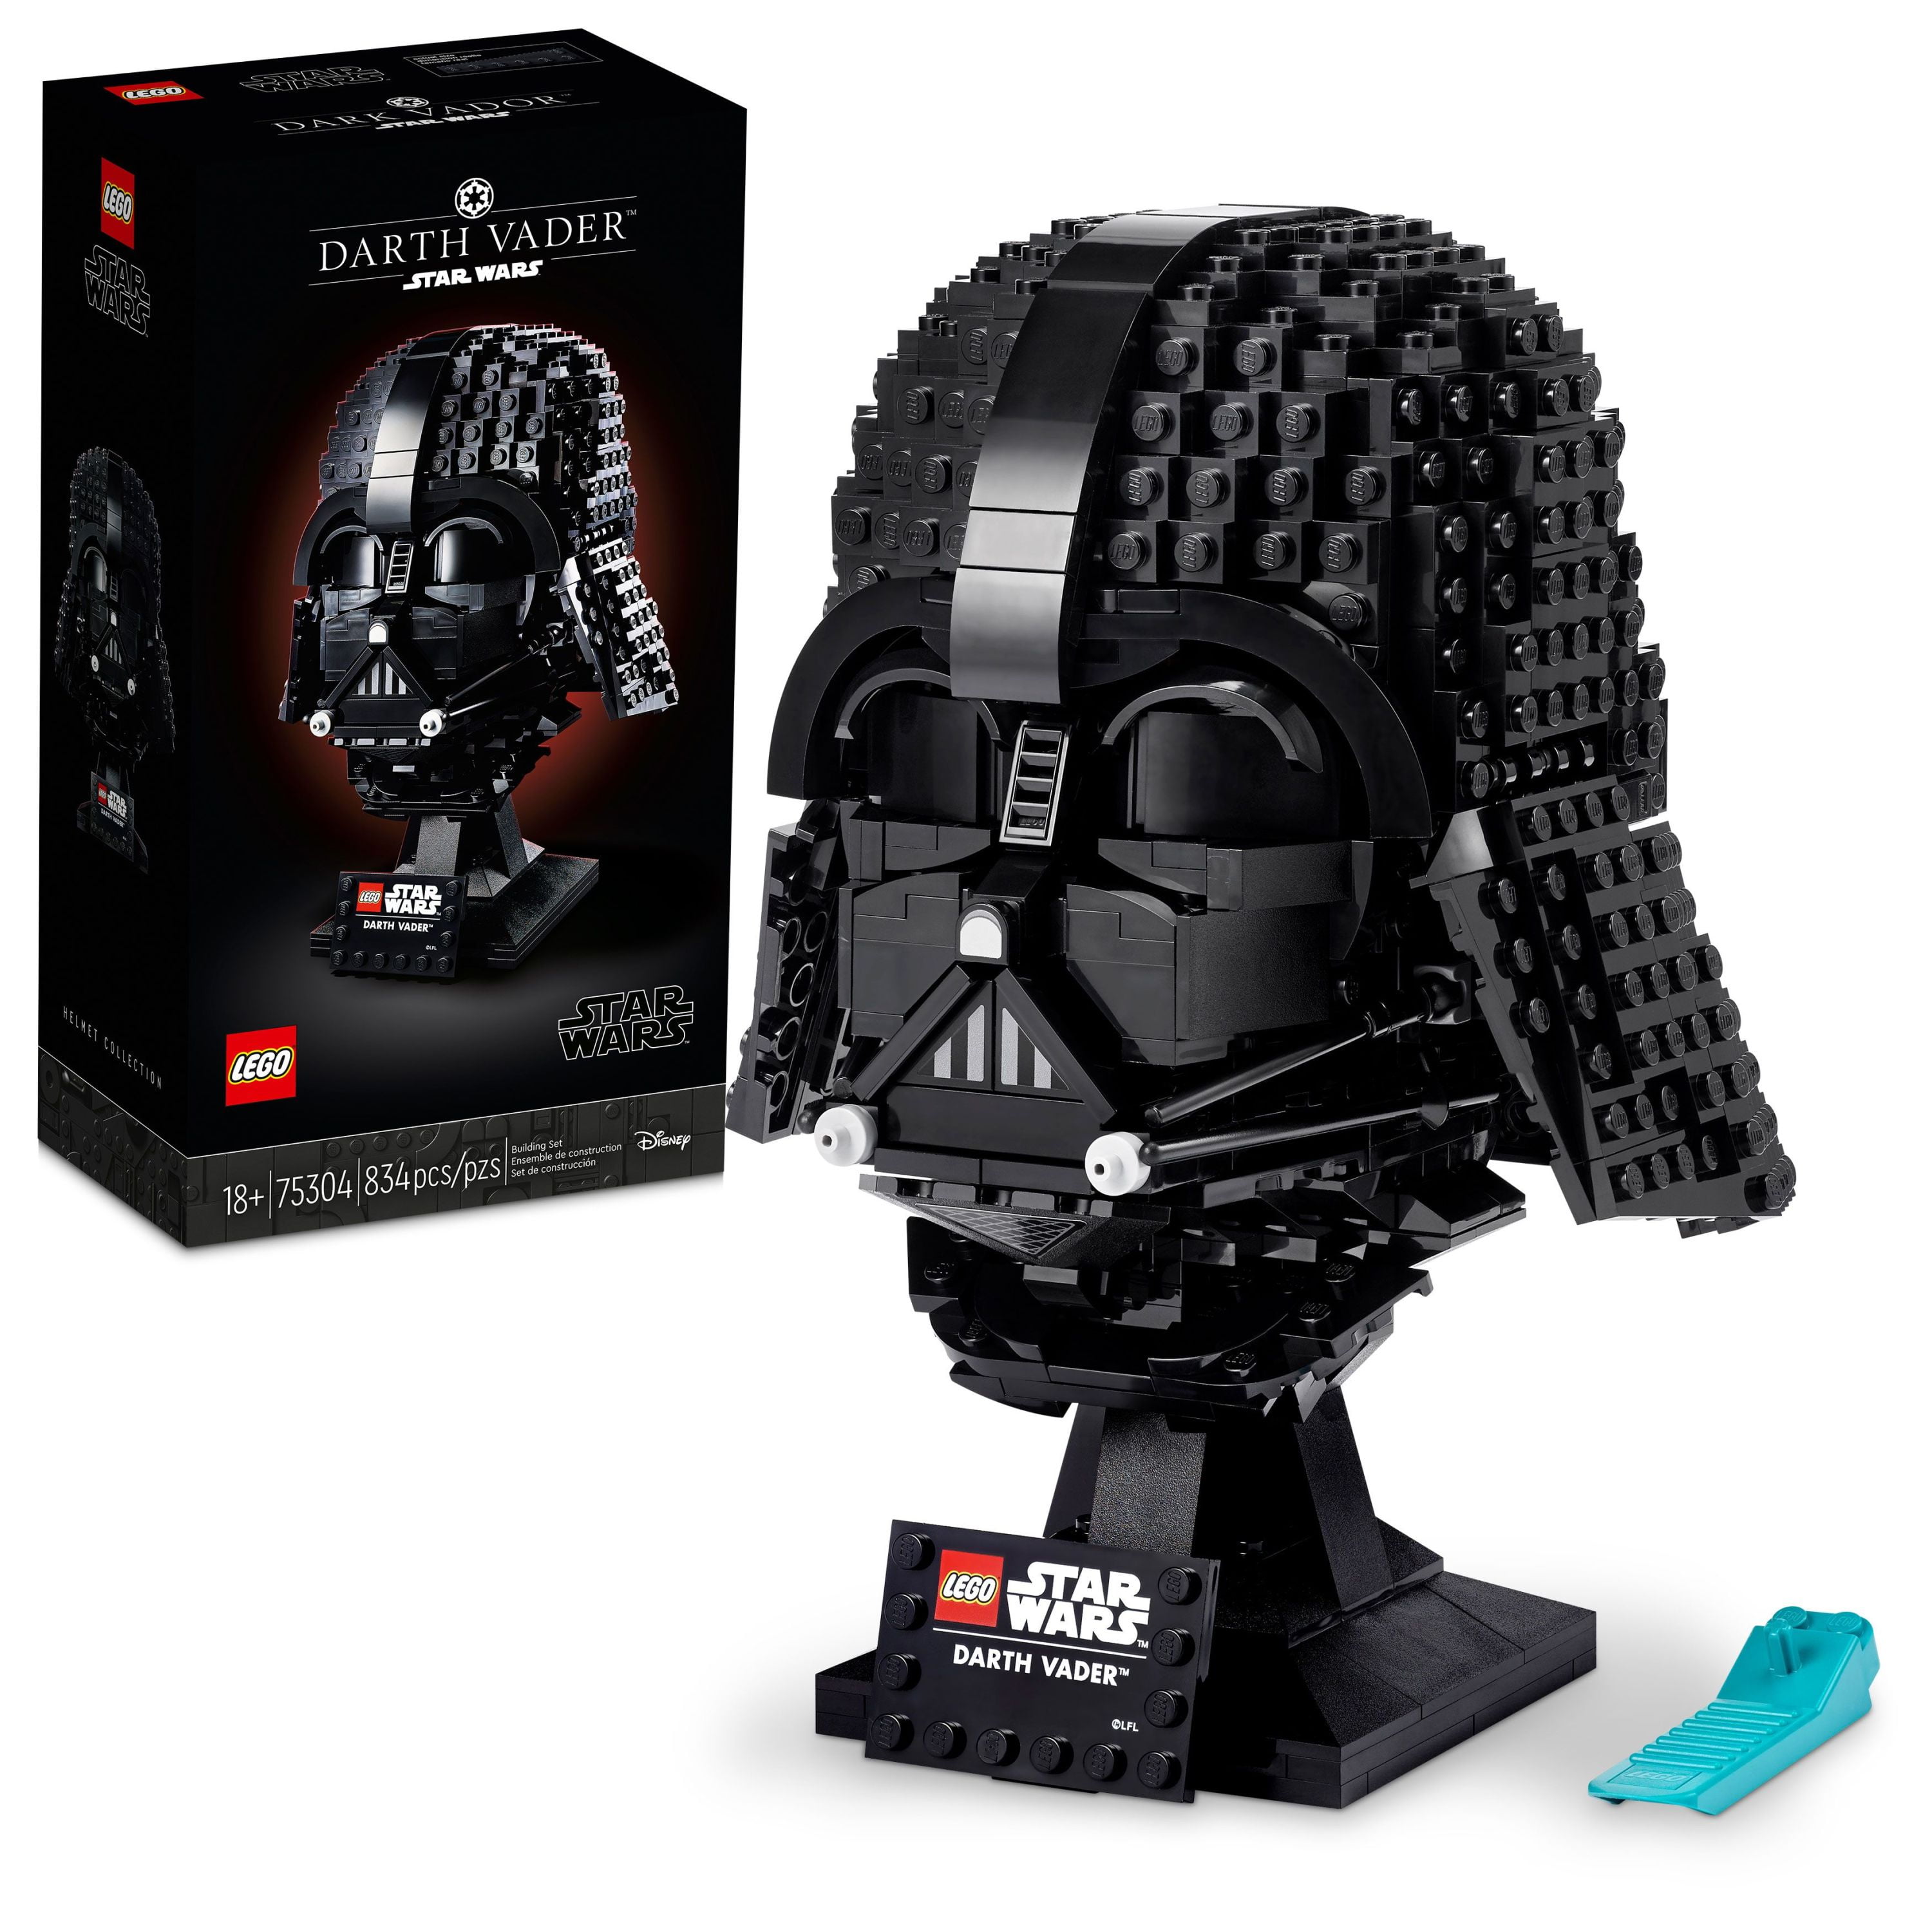 LEGO Star Wars Darth Vader Helmet 75304, Mask Display Model Kit for Adults to Build, Collectible Home Decor Model, Perfect Collectible and Back to School Gift Idea Walmart.com